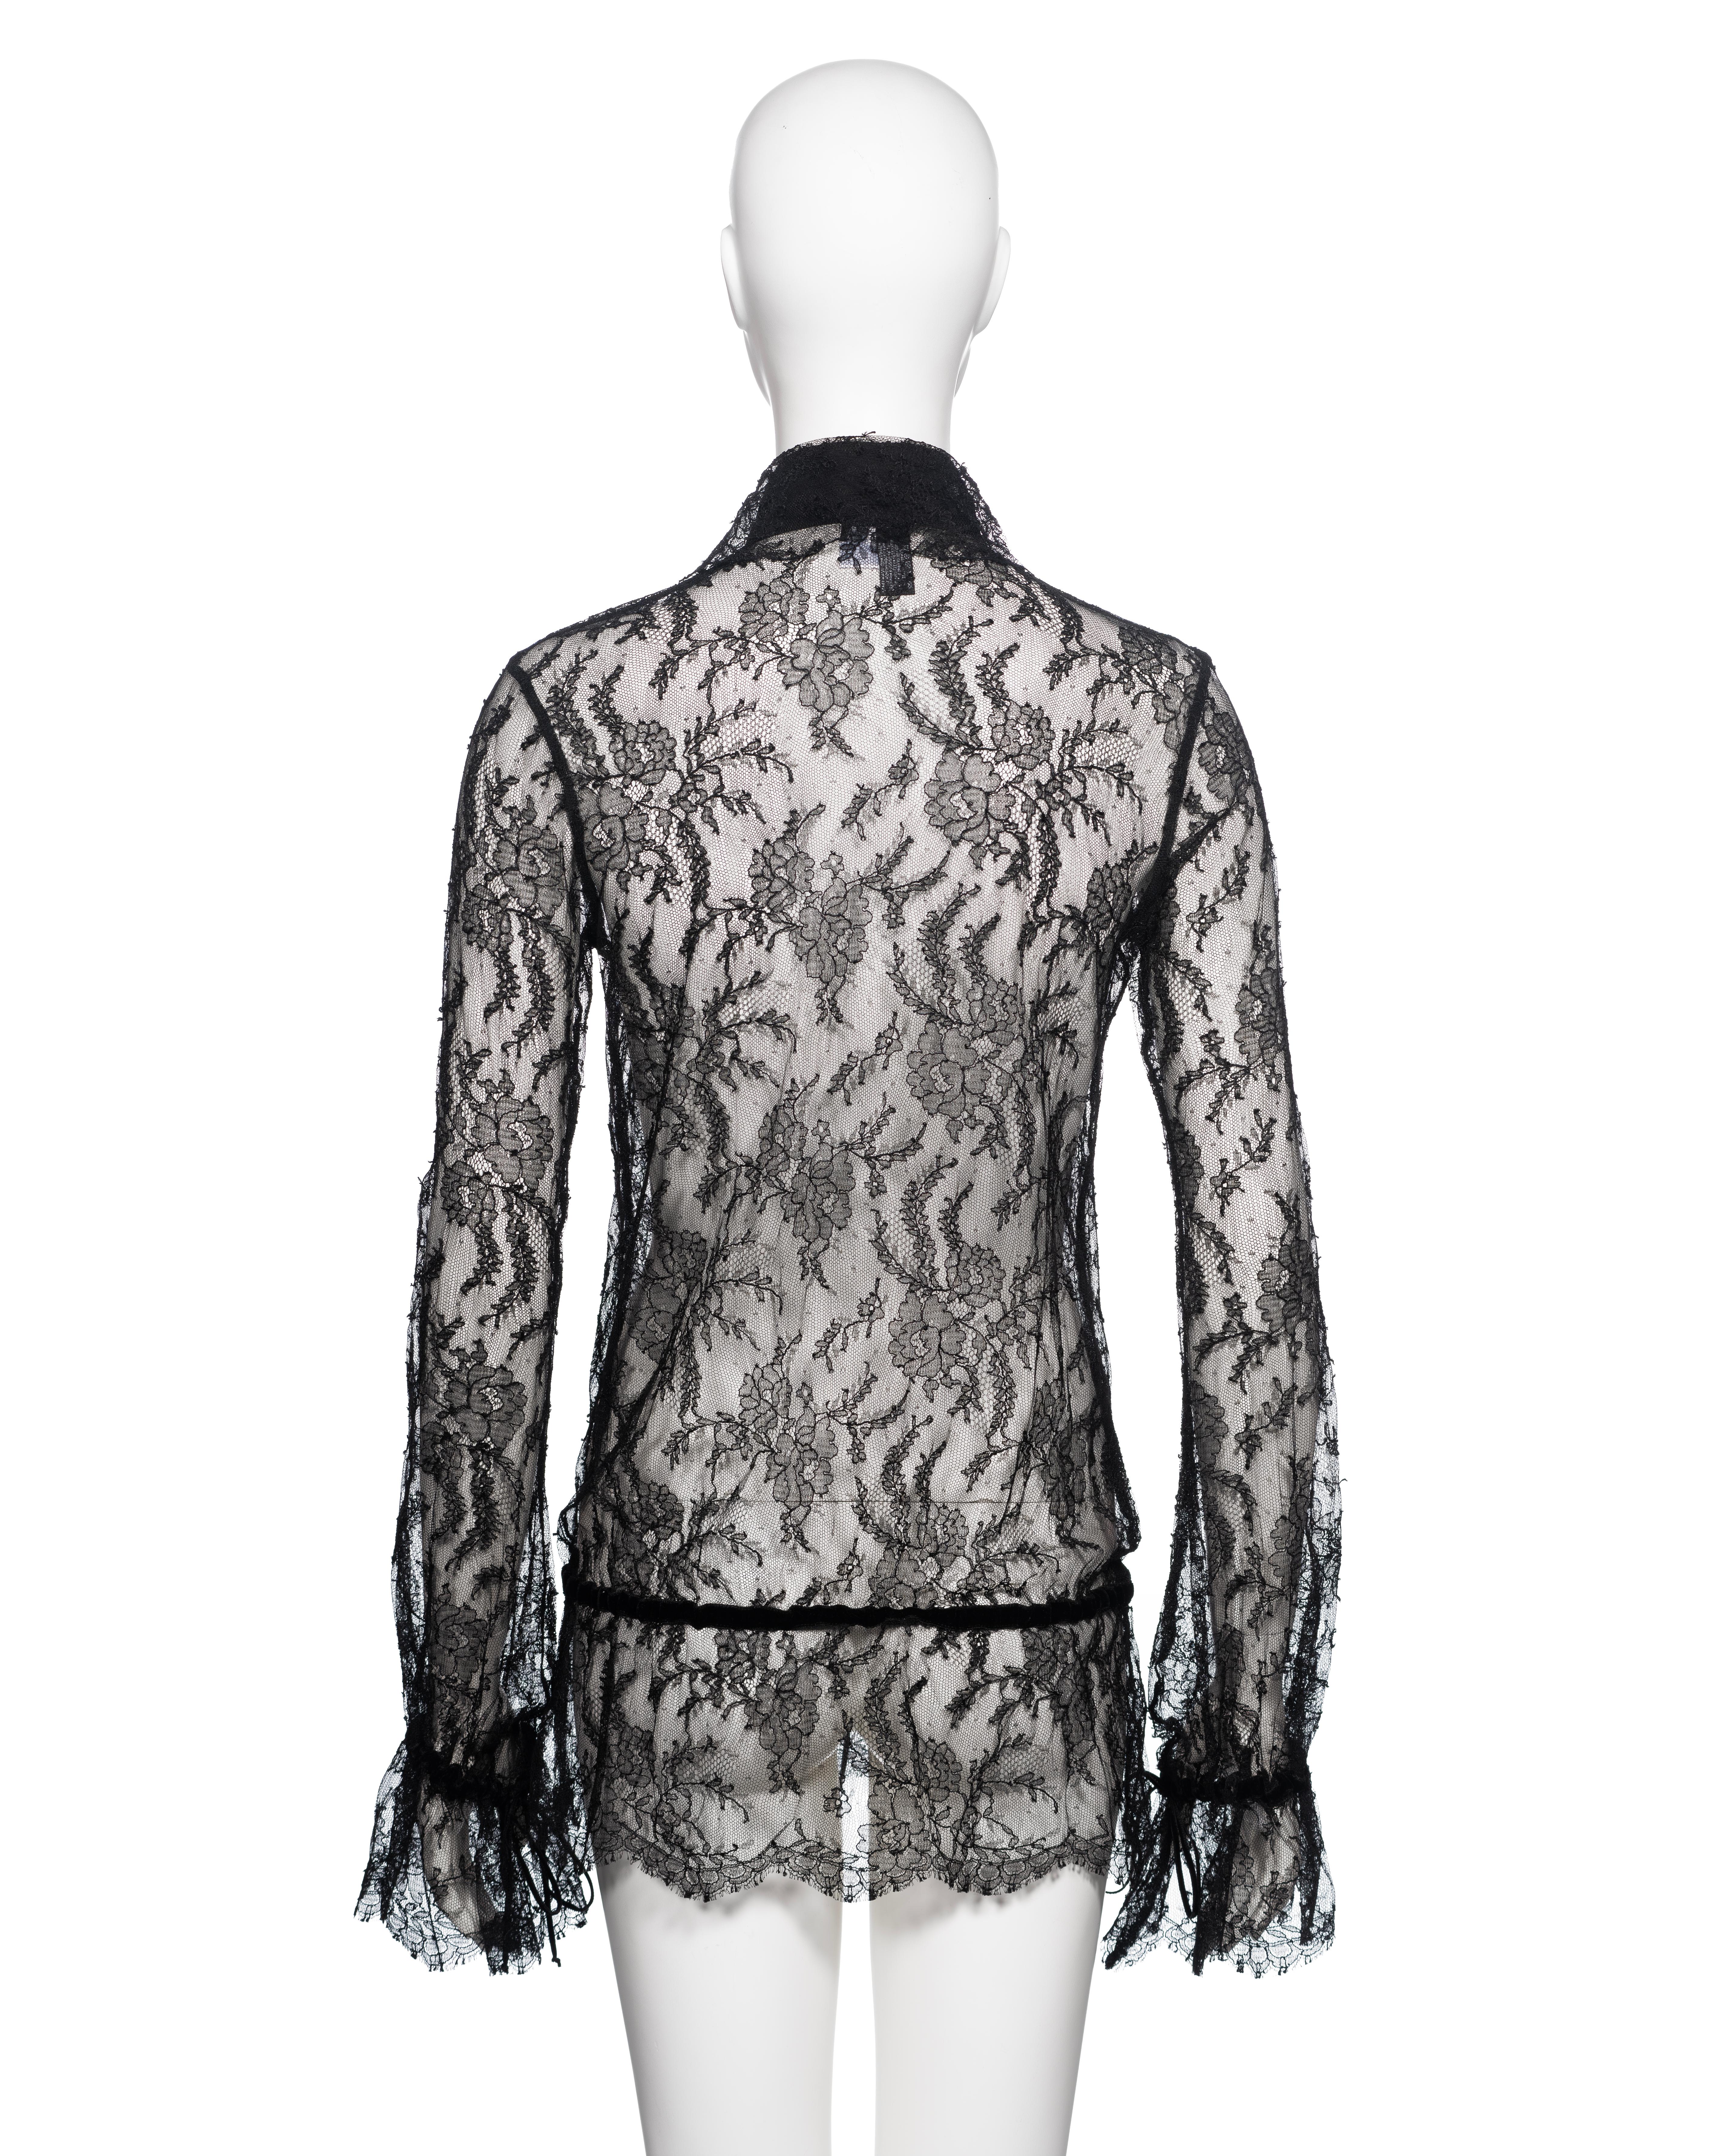 Chanel by Karl Lagerfeld Black Lace Blouse with Velvet Ribbon Trim, FW 2004 3